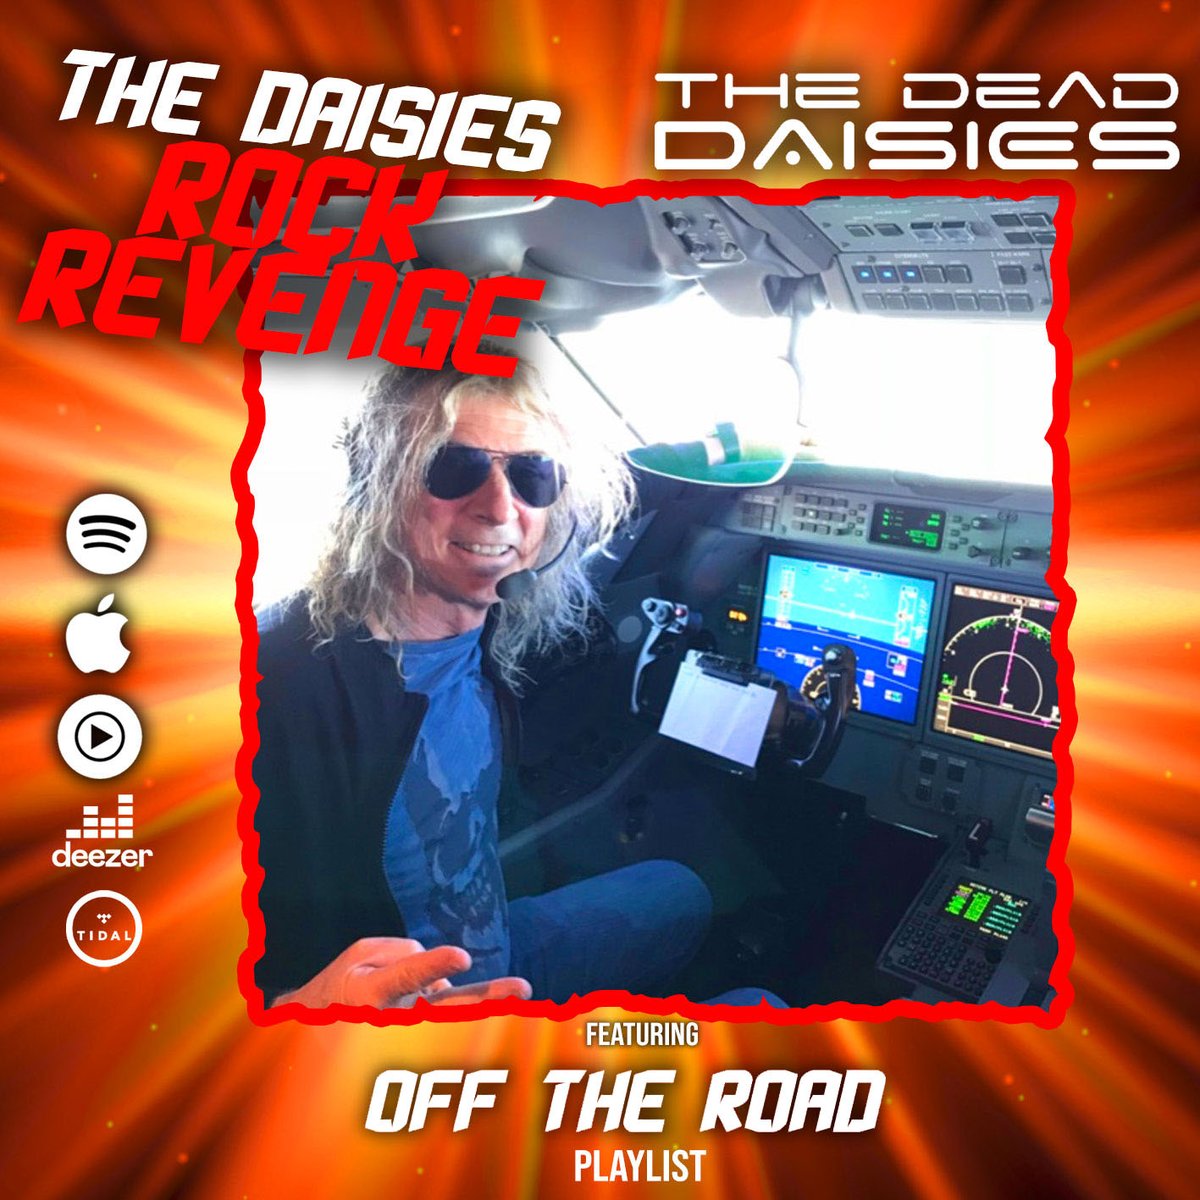 It's the weekend and time to crank up some ROCK!🤘🤘
We've pulled this 'Off The Road' playlist together for you to enjoy!🚀🚀

thedeaddaisies.com/daisies-rock-r…

#TheDeadDaisies #TheDaisiesRockRevenge #OffTheRoad